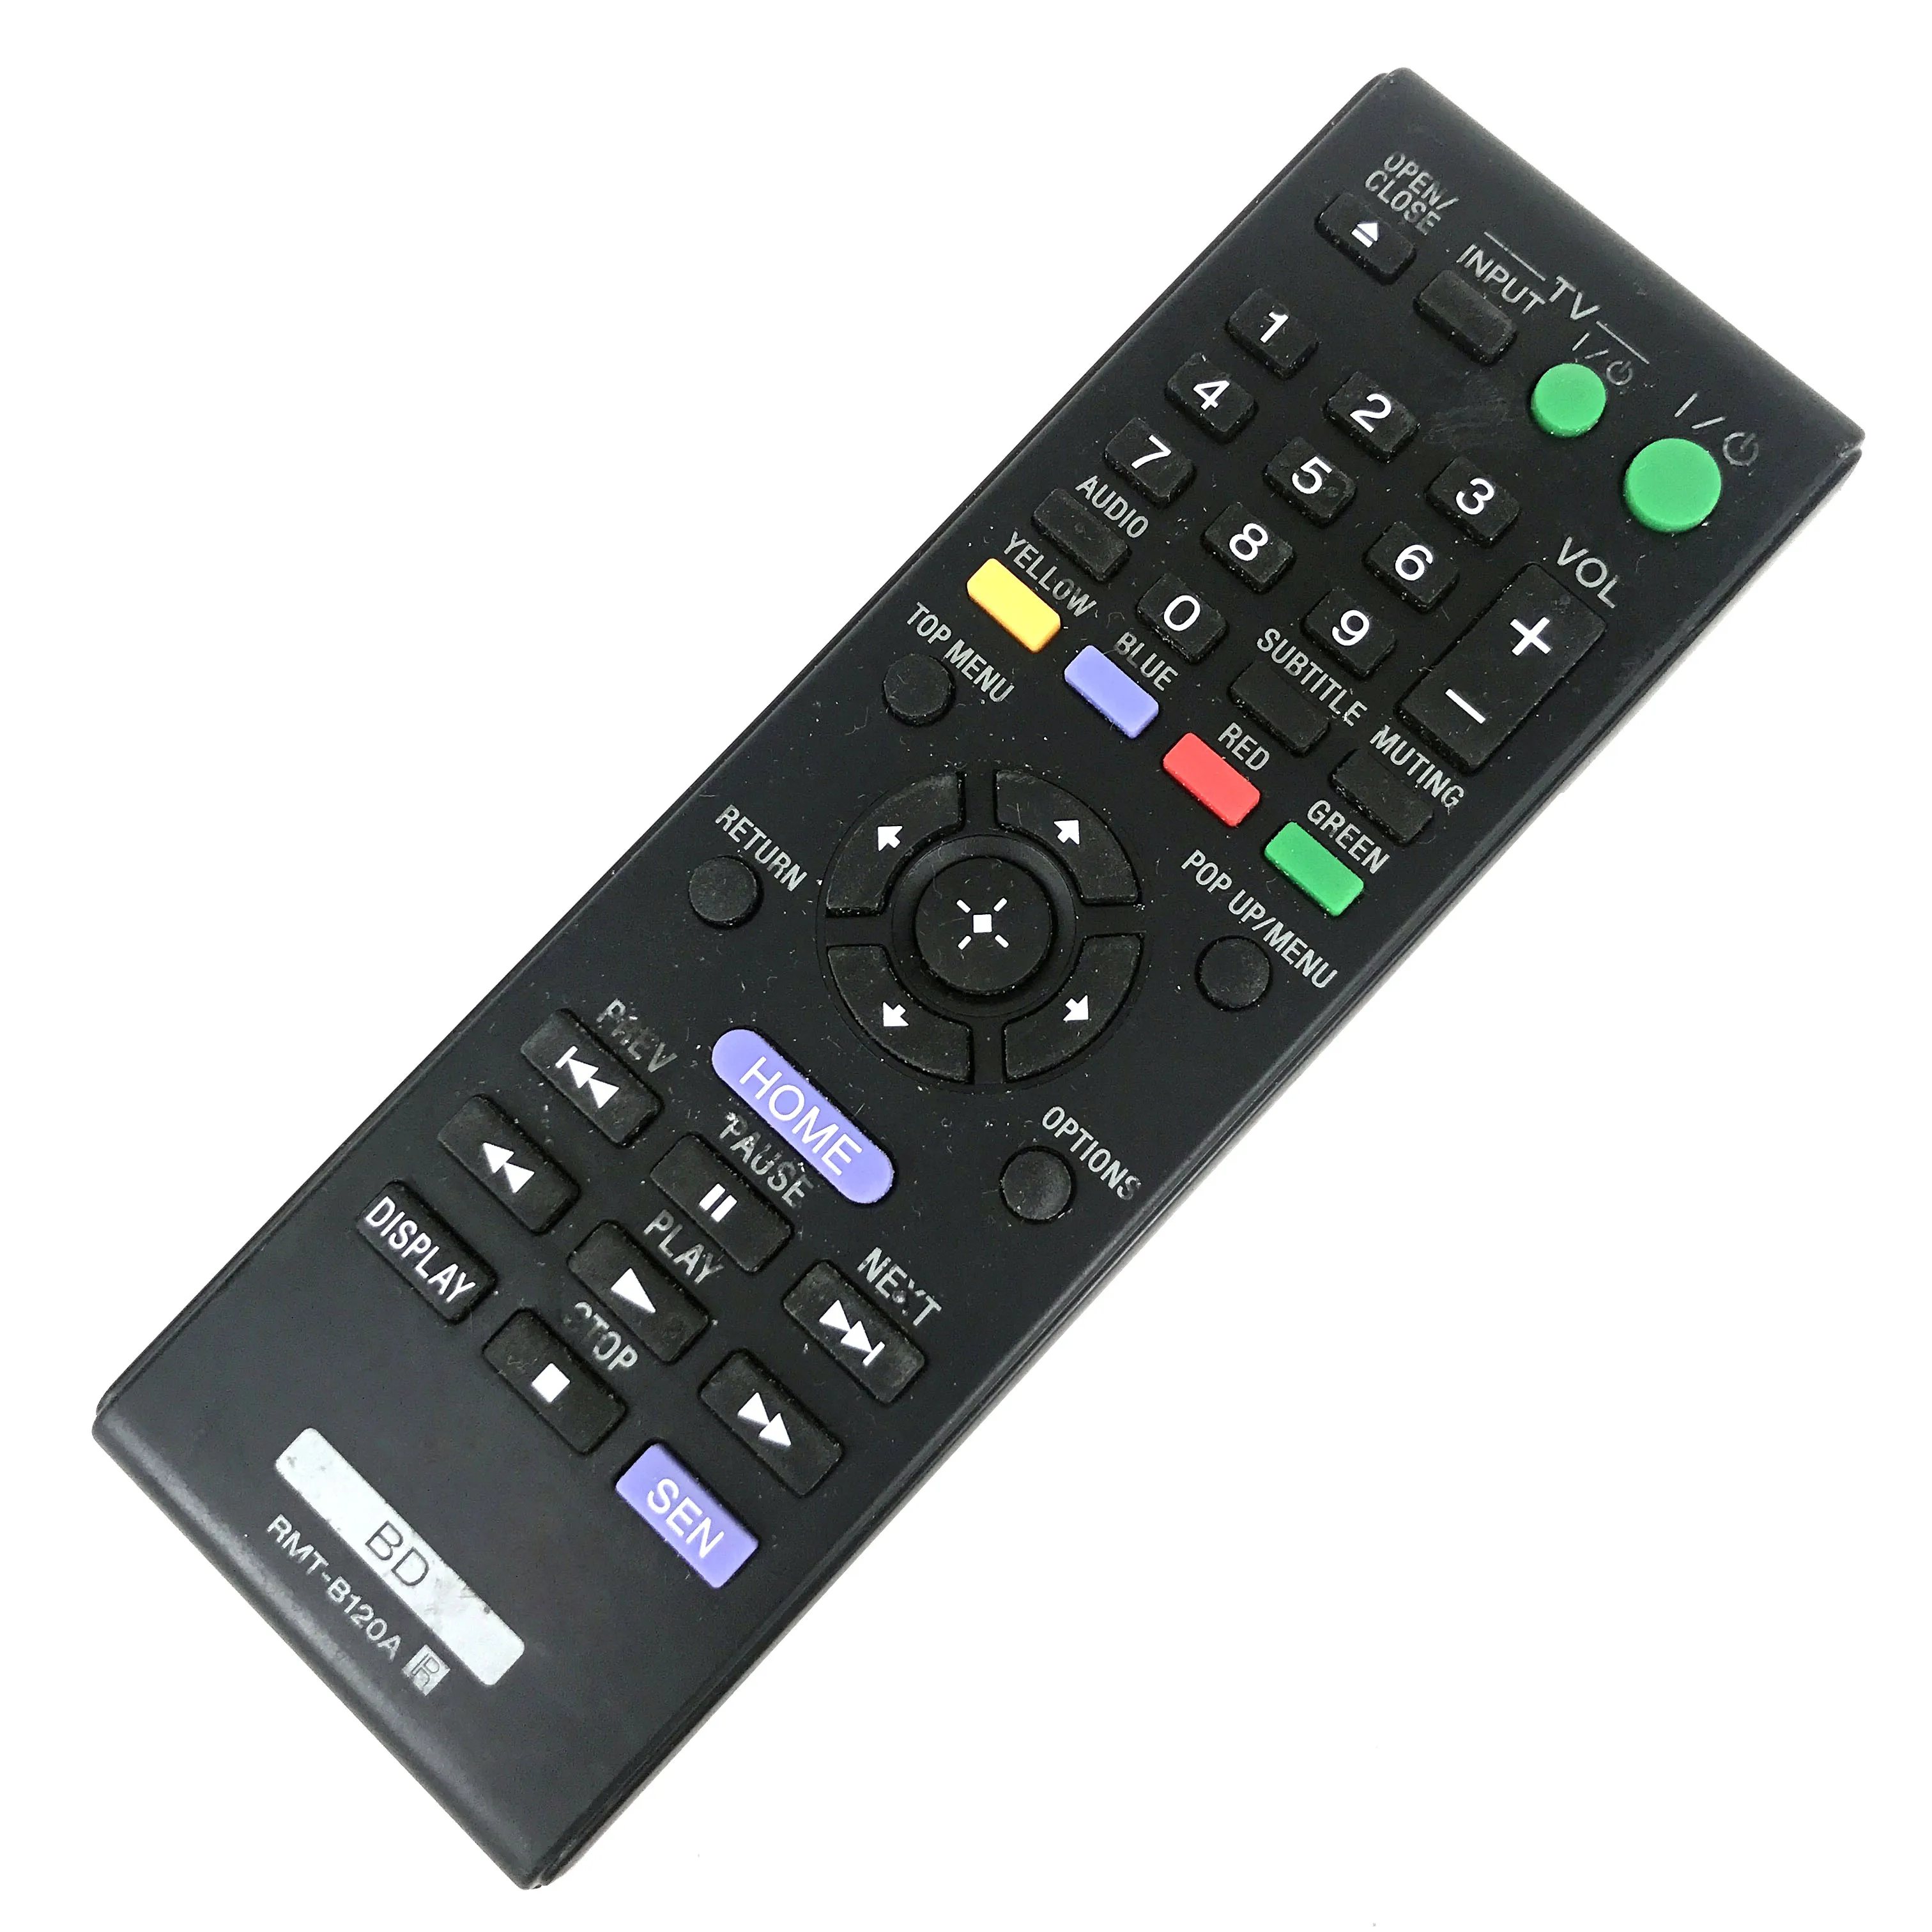 

Used Original remote control RMT-B120A For SONY BLU-RAY DVD PLAYER BDP-S1100 BDP-S190 BDP-S3100 BDP-S390 BDP-S490 BDP-S510